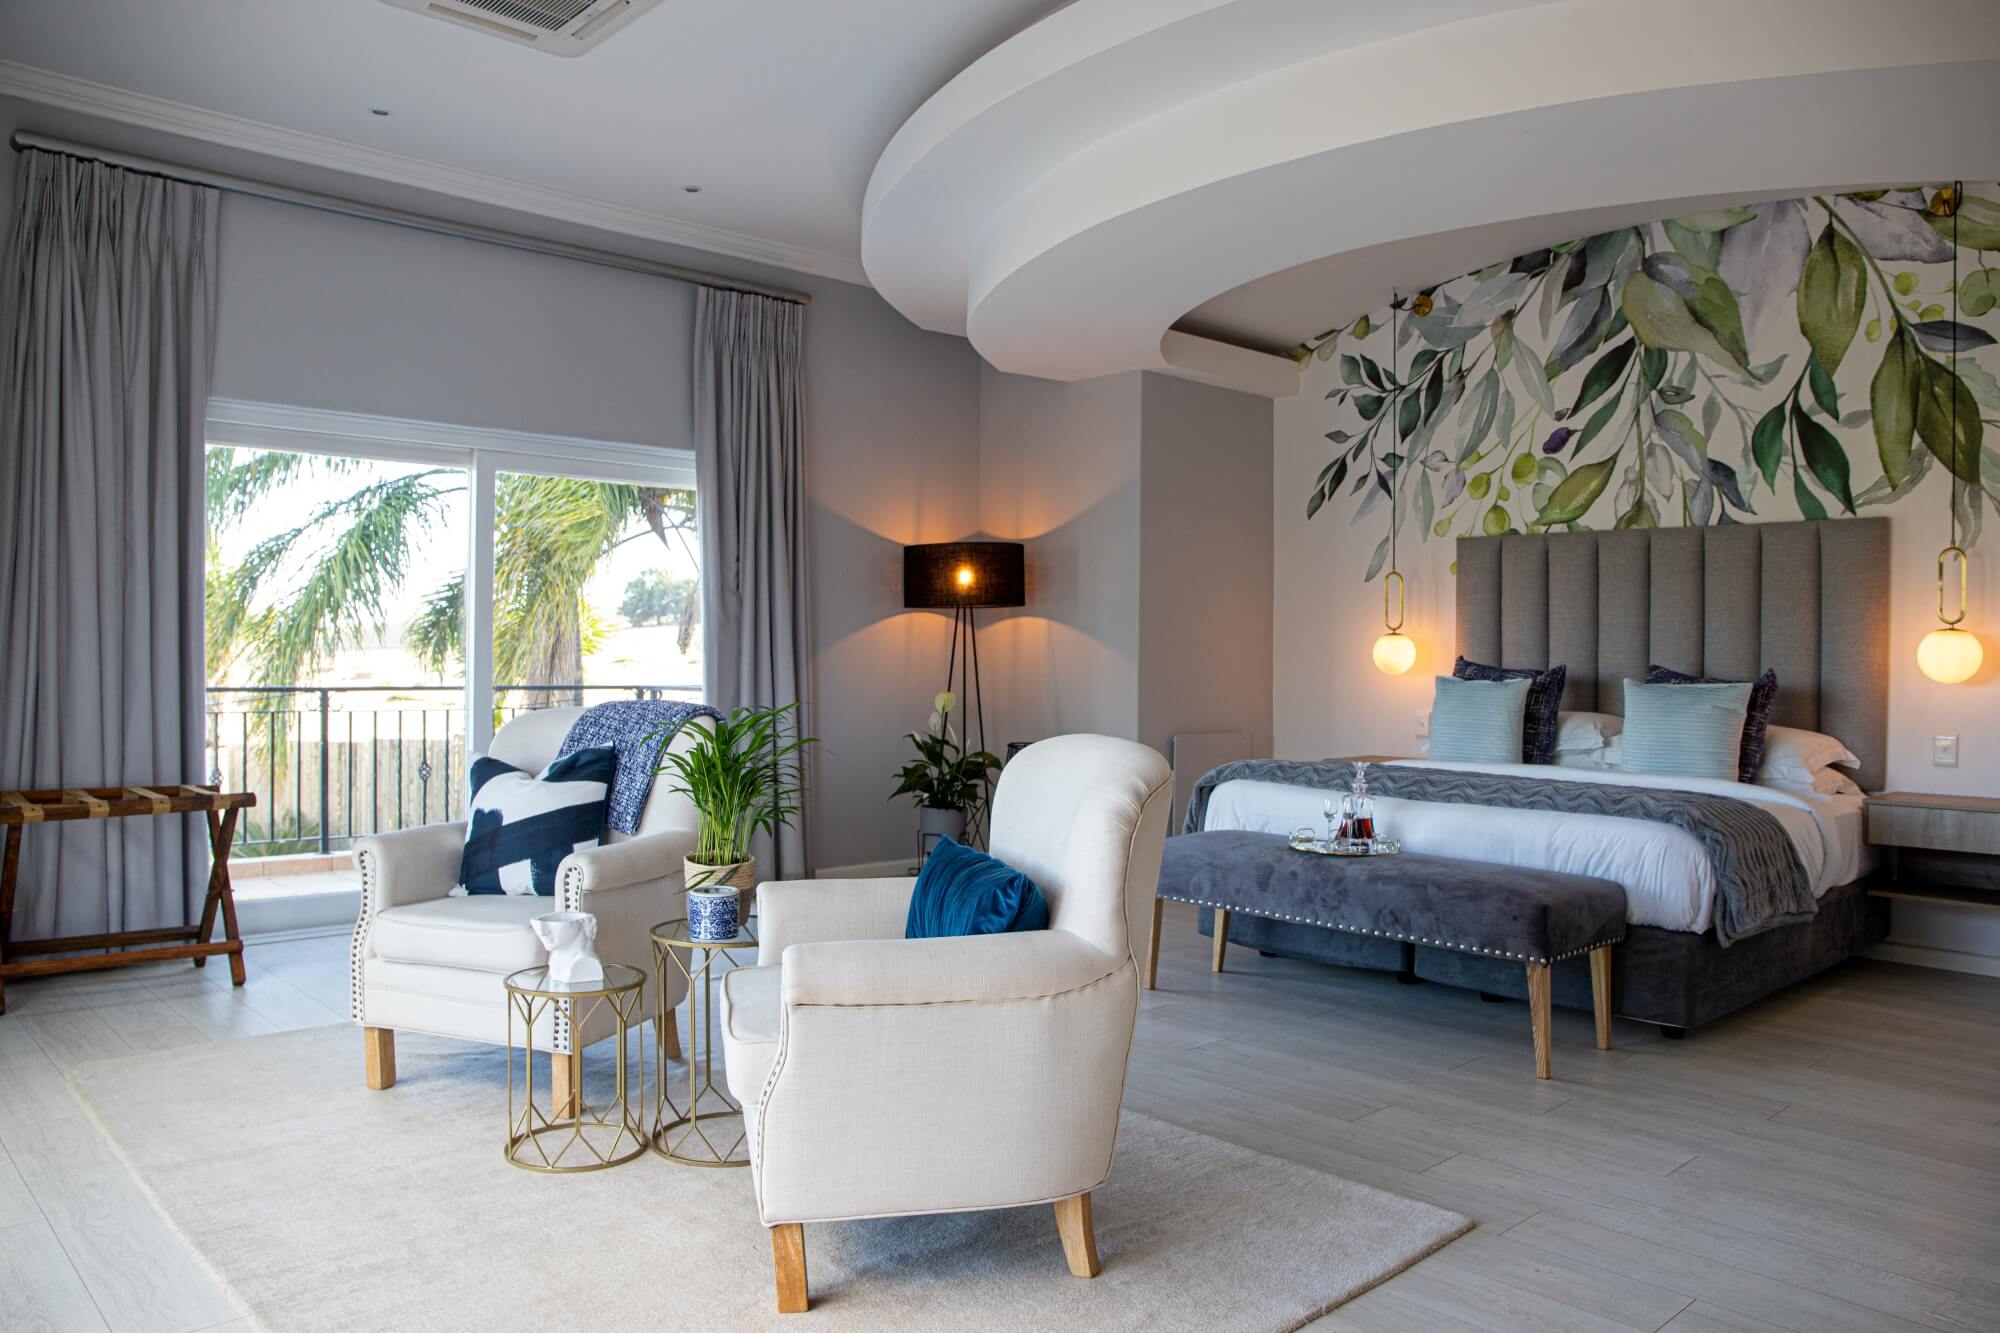 Image of a luxury suite at The Salene in Stellenbosch, a boutique hotel offering luxury accommodation near the best wine farms.